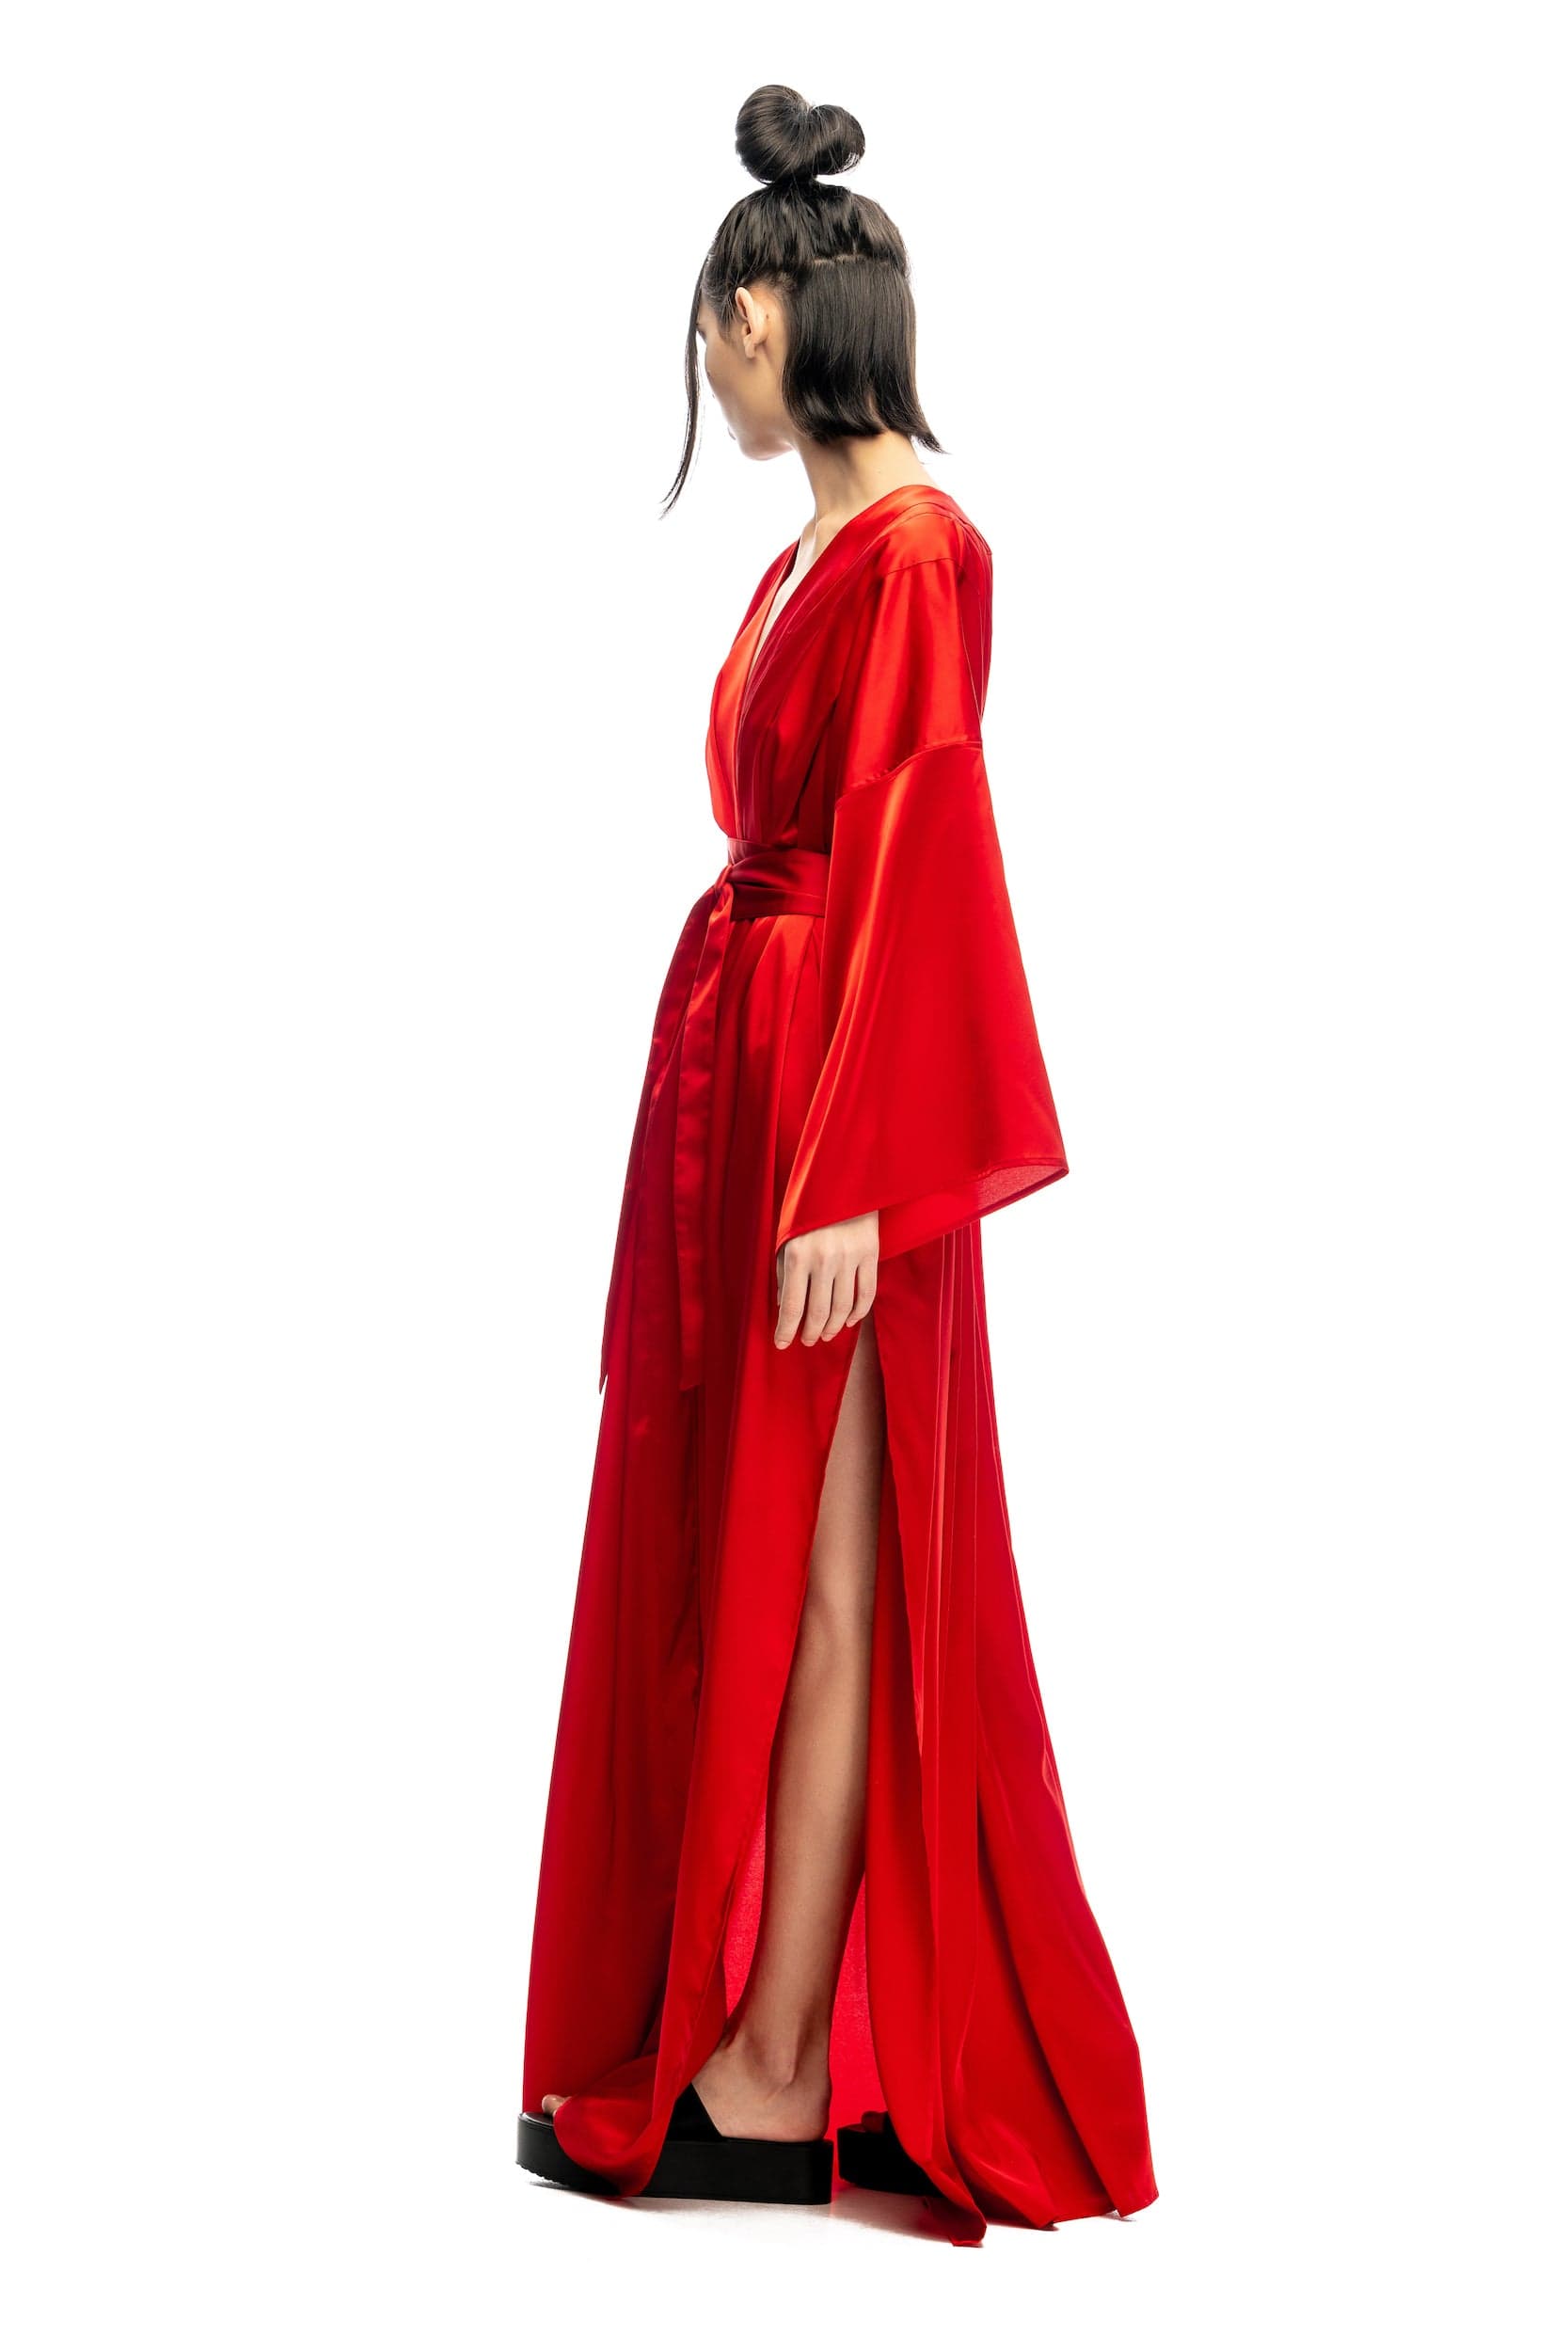 MDNT45 One size / Red Fiery dress